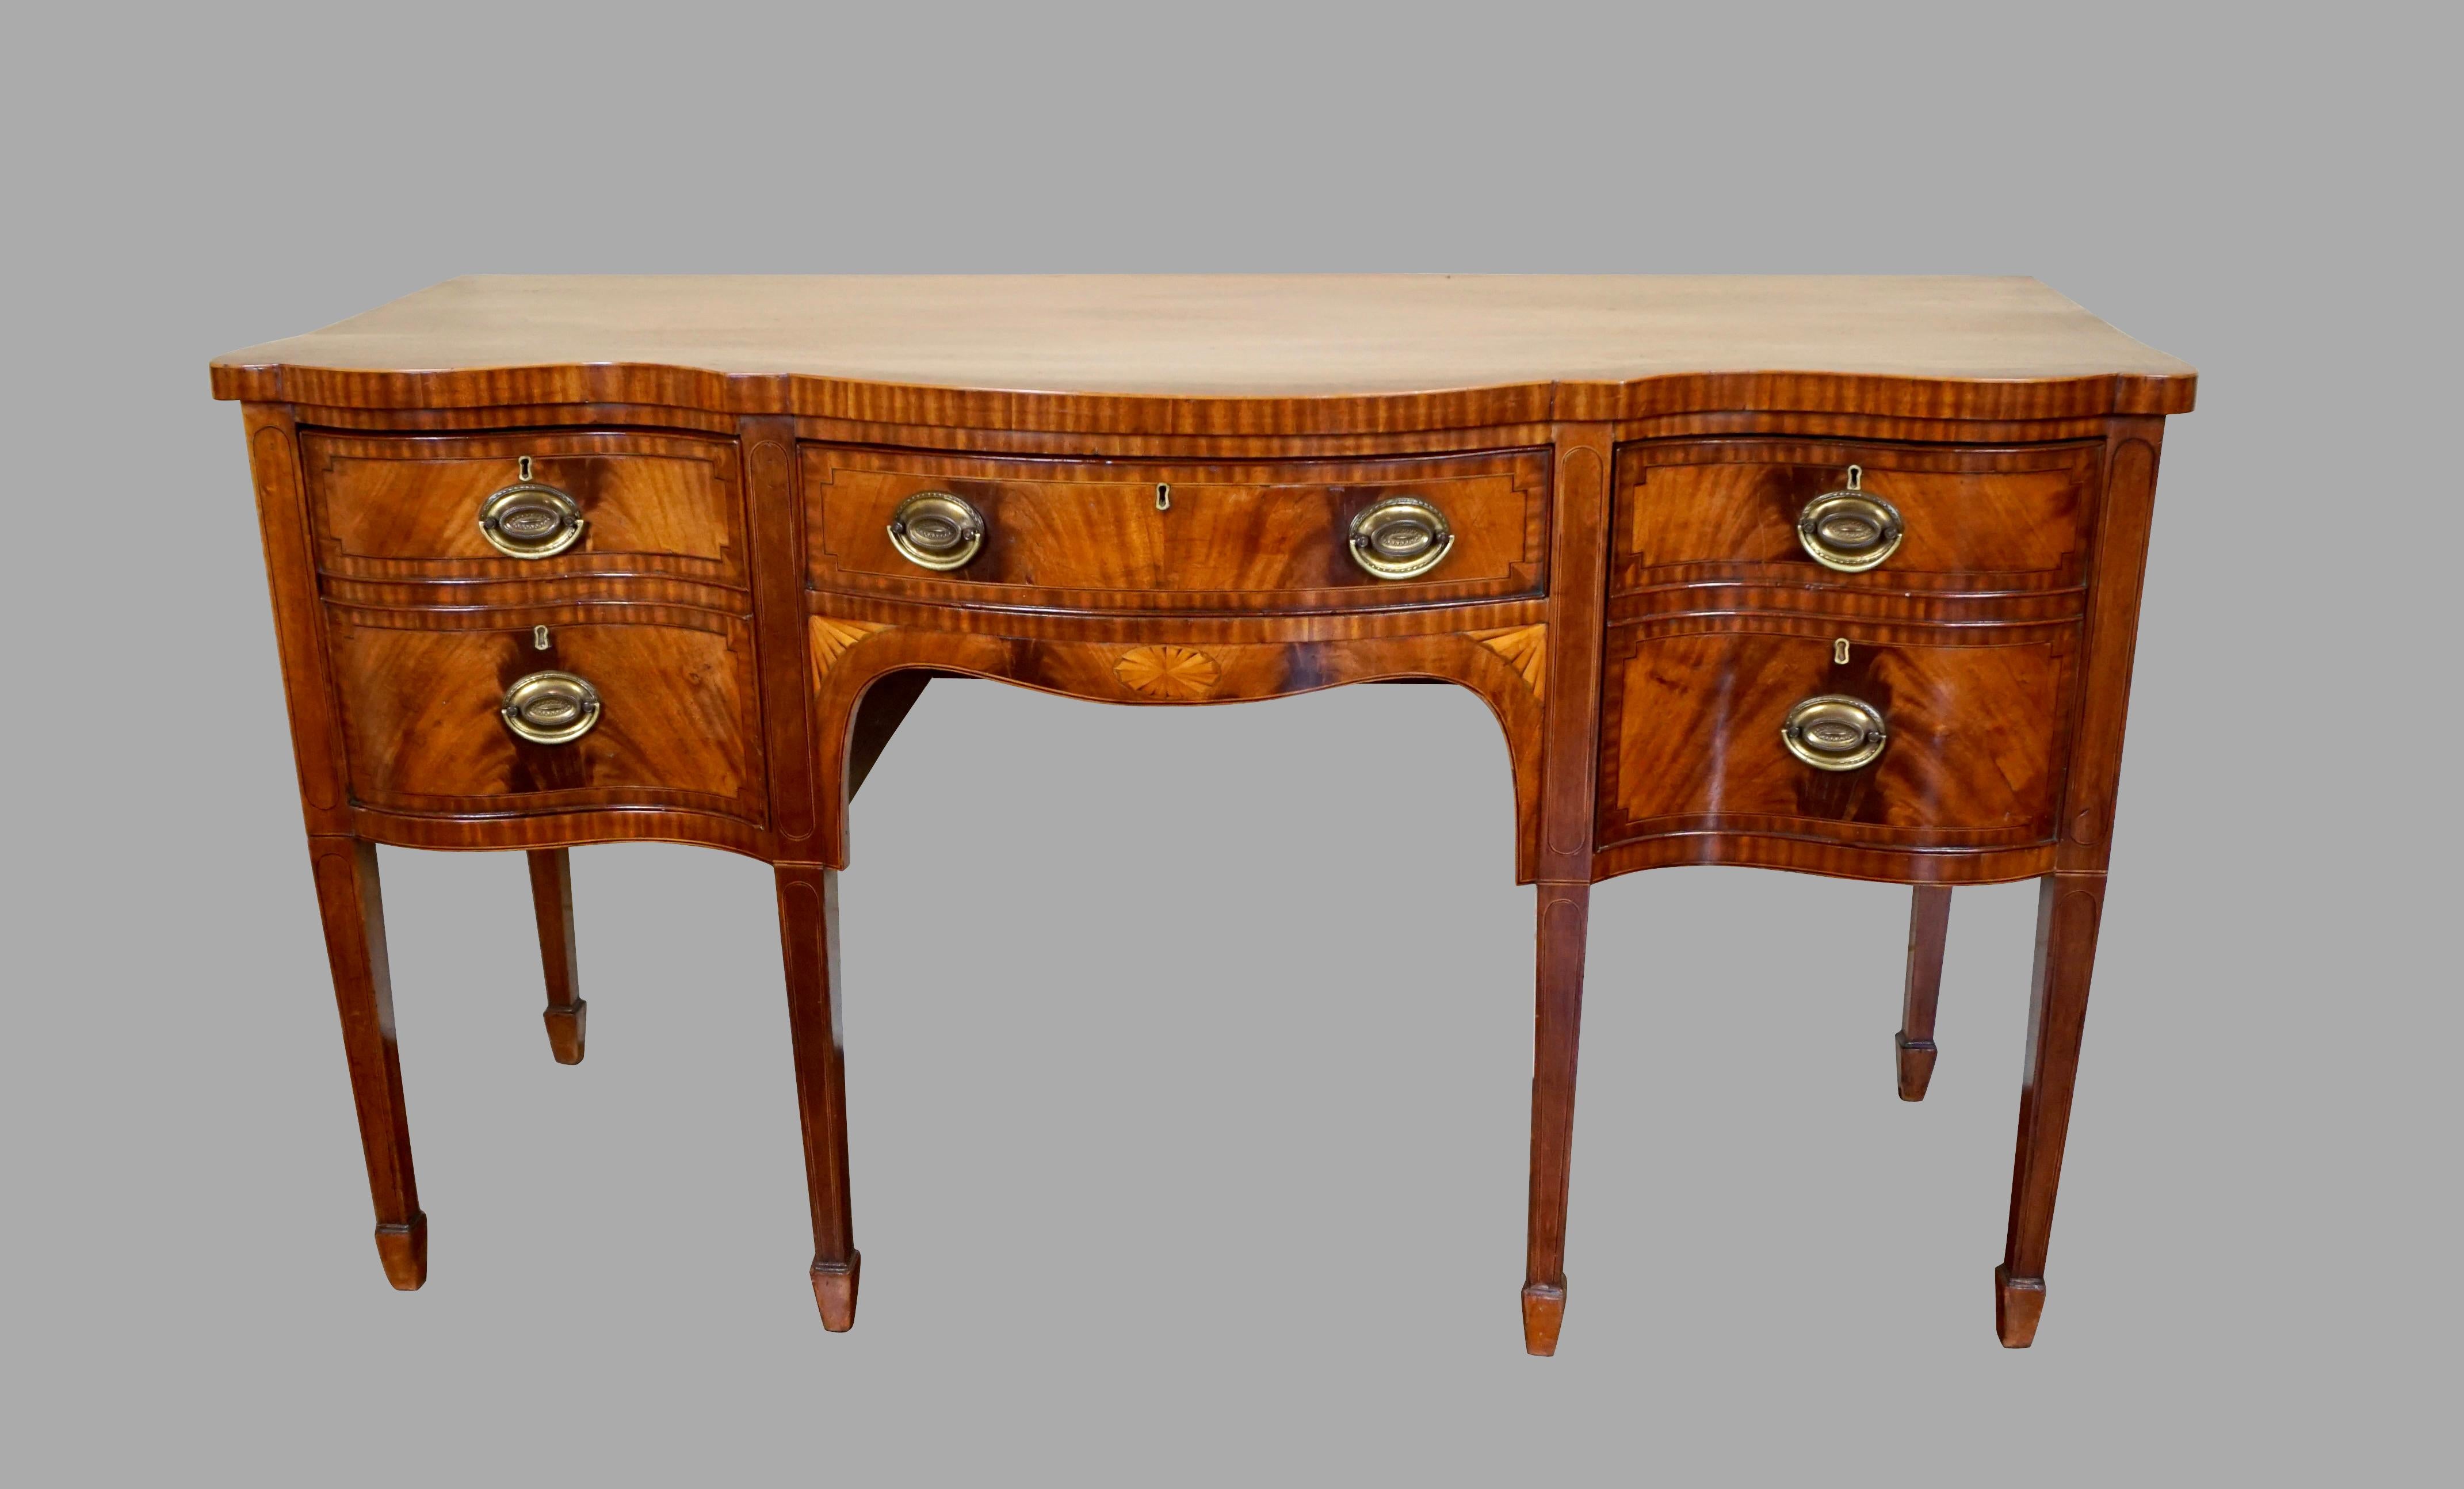 A fine English mahogany satinwood inlaid serpentine front sideboard with crossbanded string inlaid drawers. The center drawer rests above an apron with a satinwood inlaid oval paterae framed with fan inlaid corners. The piece is supported on line